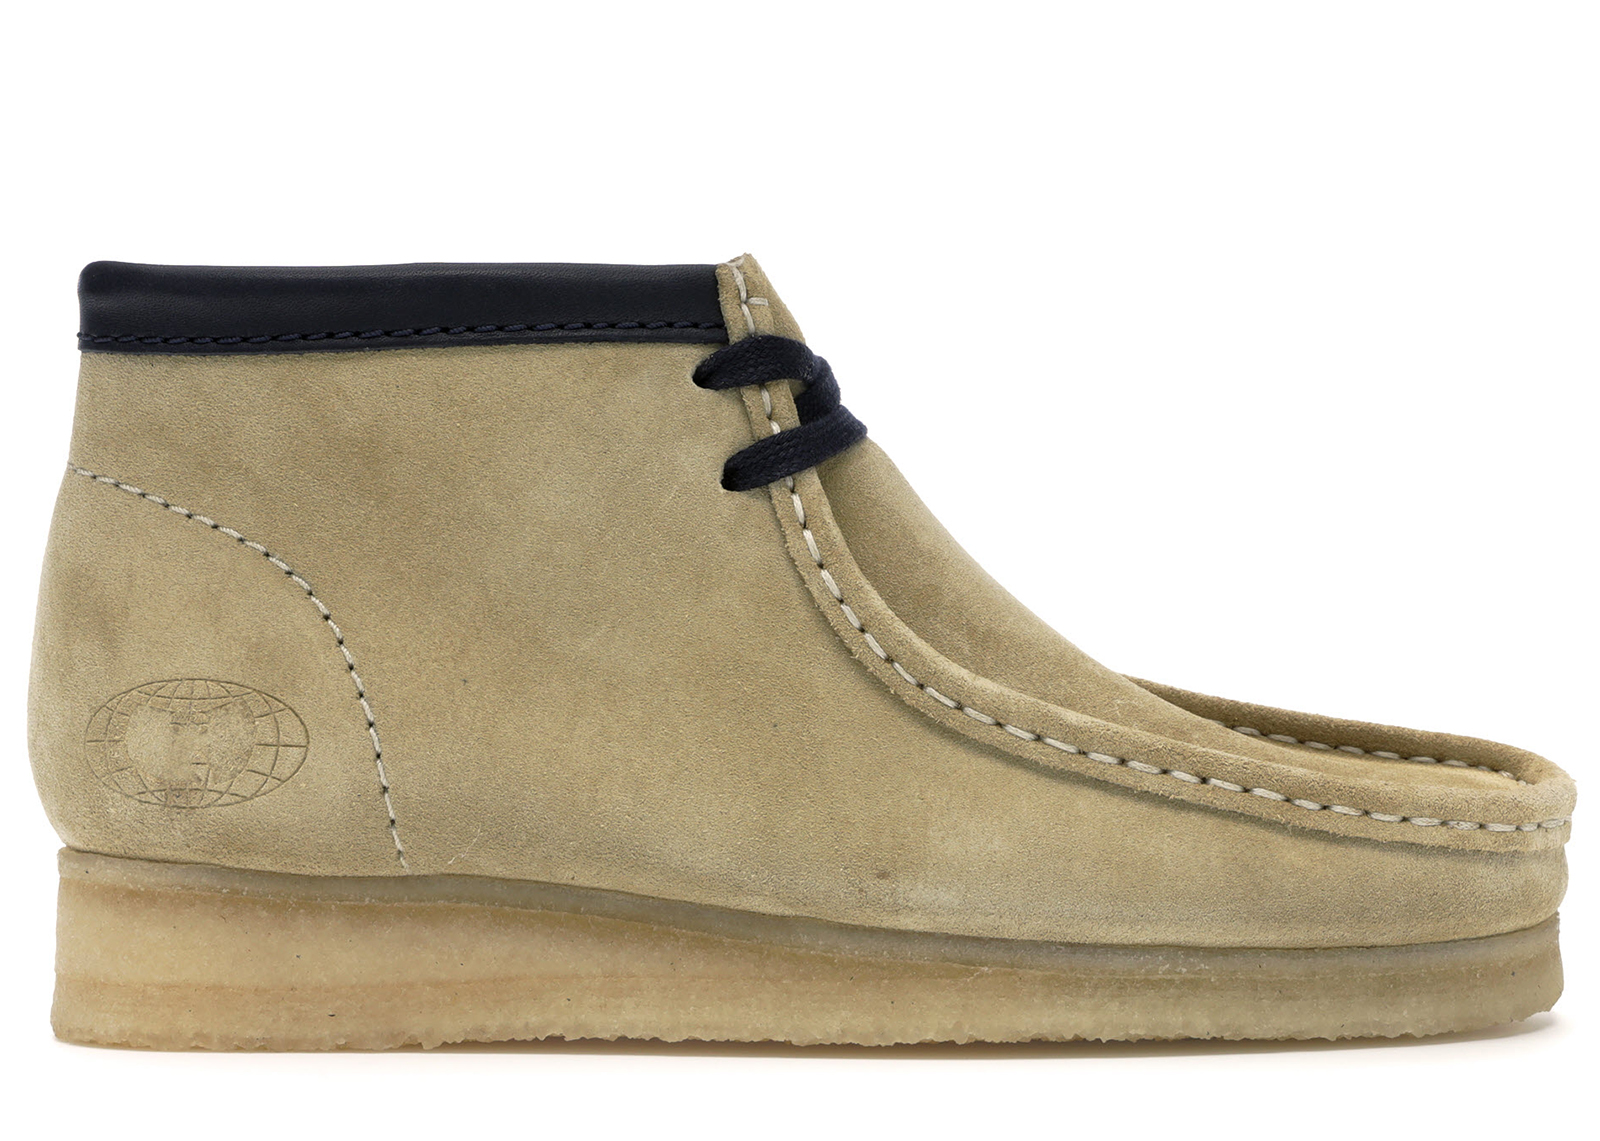 Clarks Wallabees Wu-Tang 36 Chambers 25th Anniversary Maple Men's